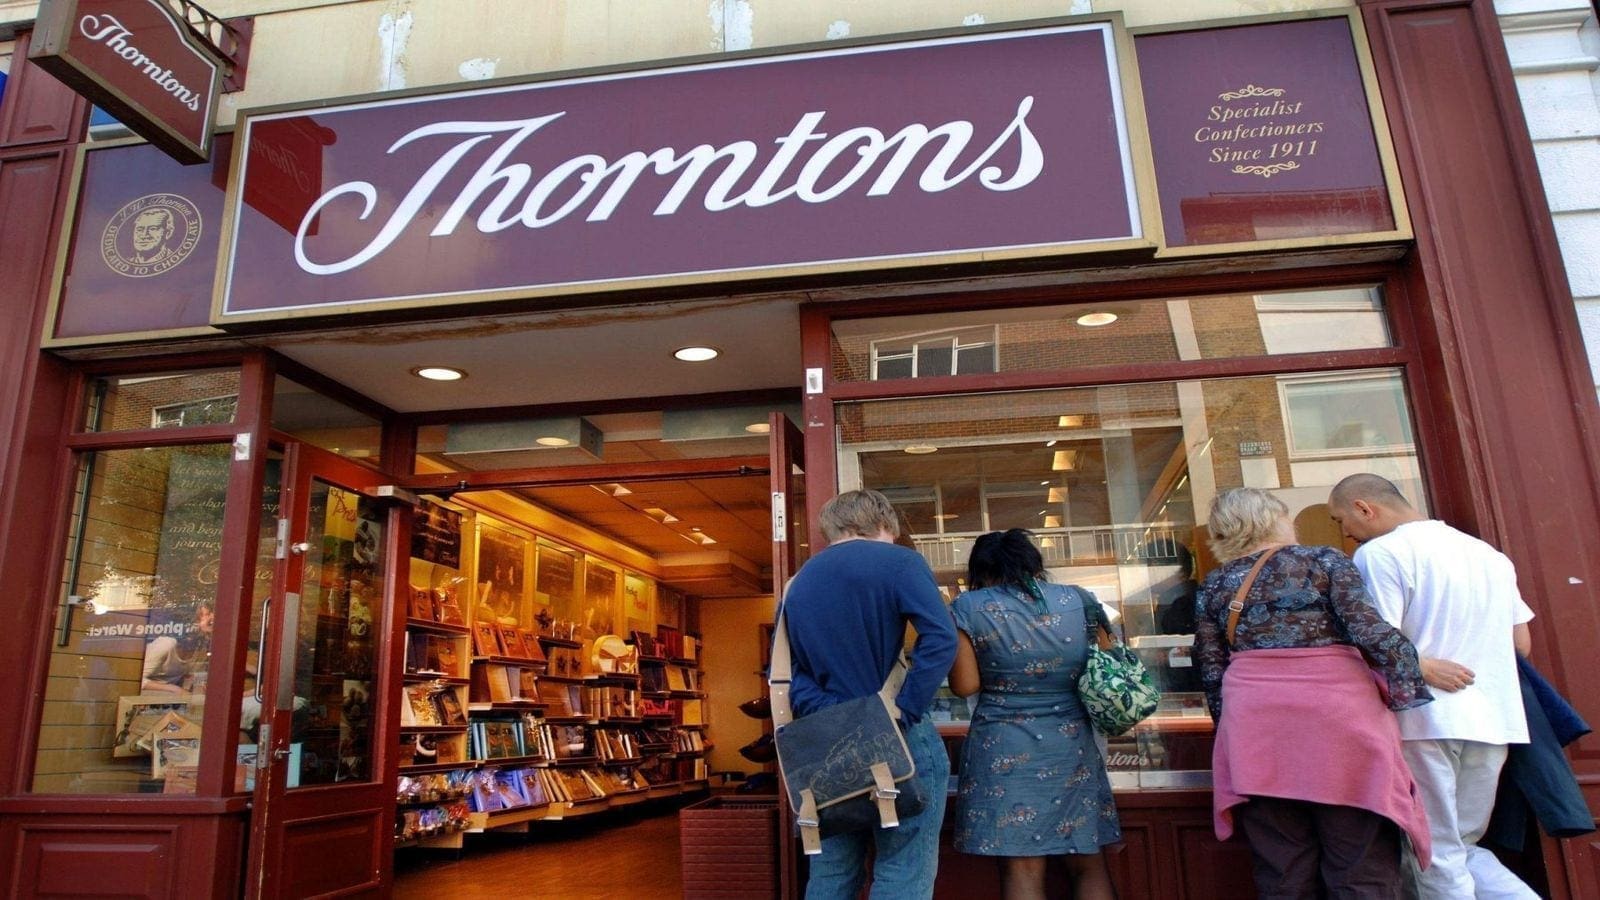 British confectionery brand Thorntons to close all UK stores citing ongoing Covid-19 impact on retail market